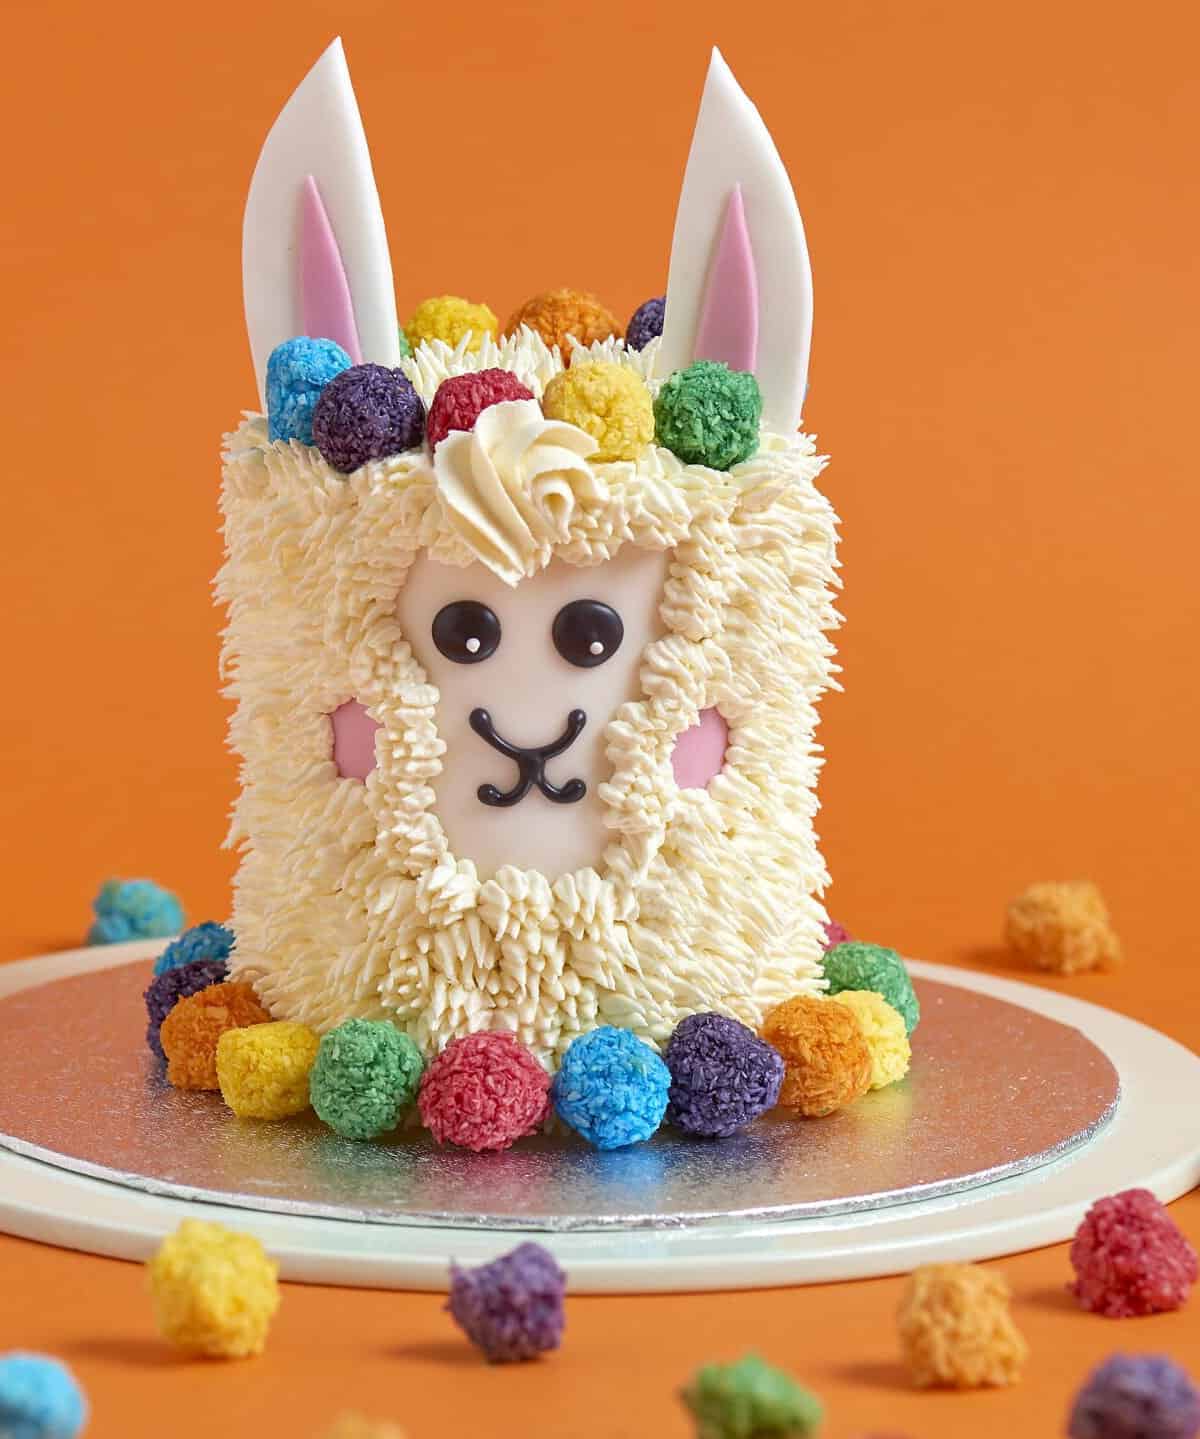 Deliciously Sweet: Try our Dulce De Leche Llama Cake